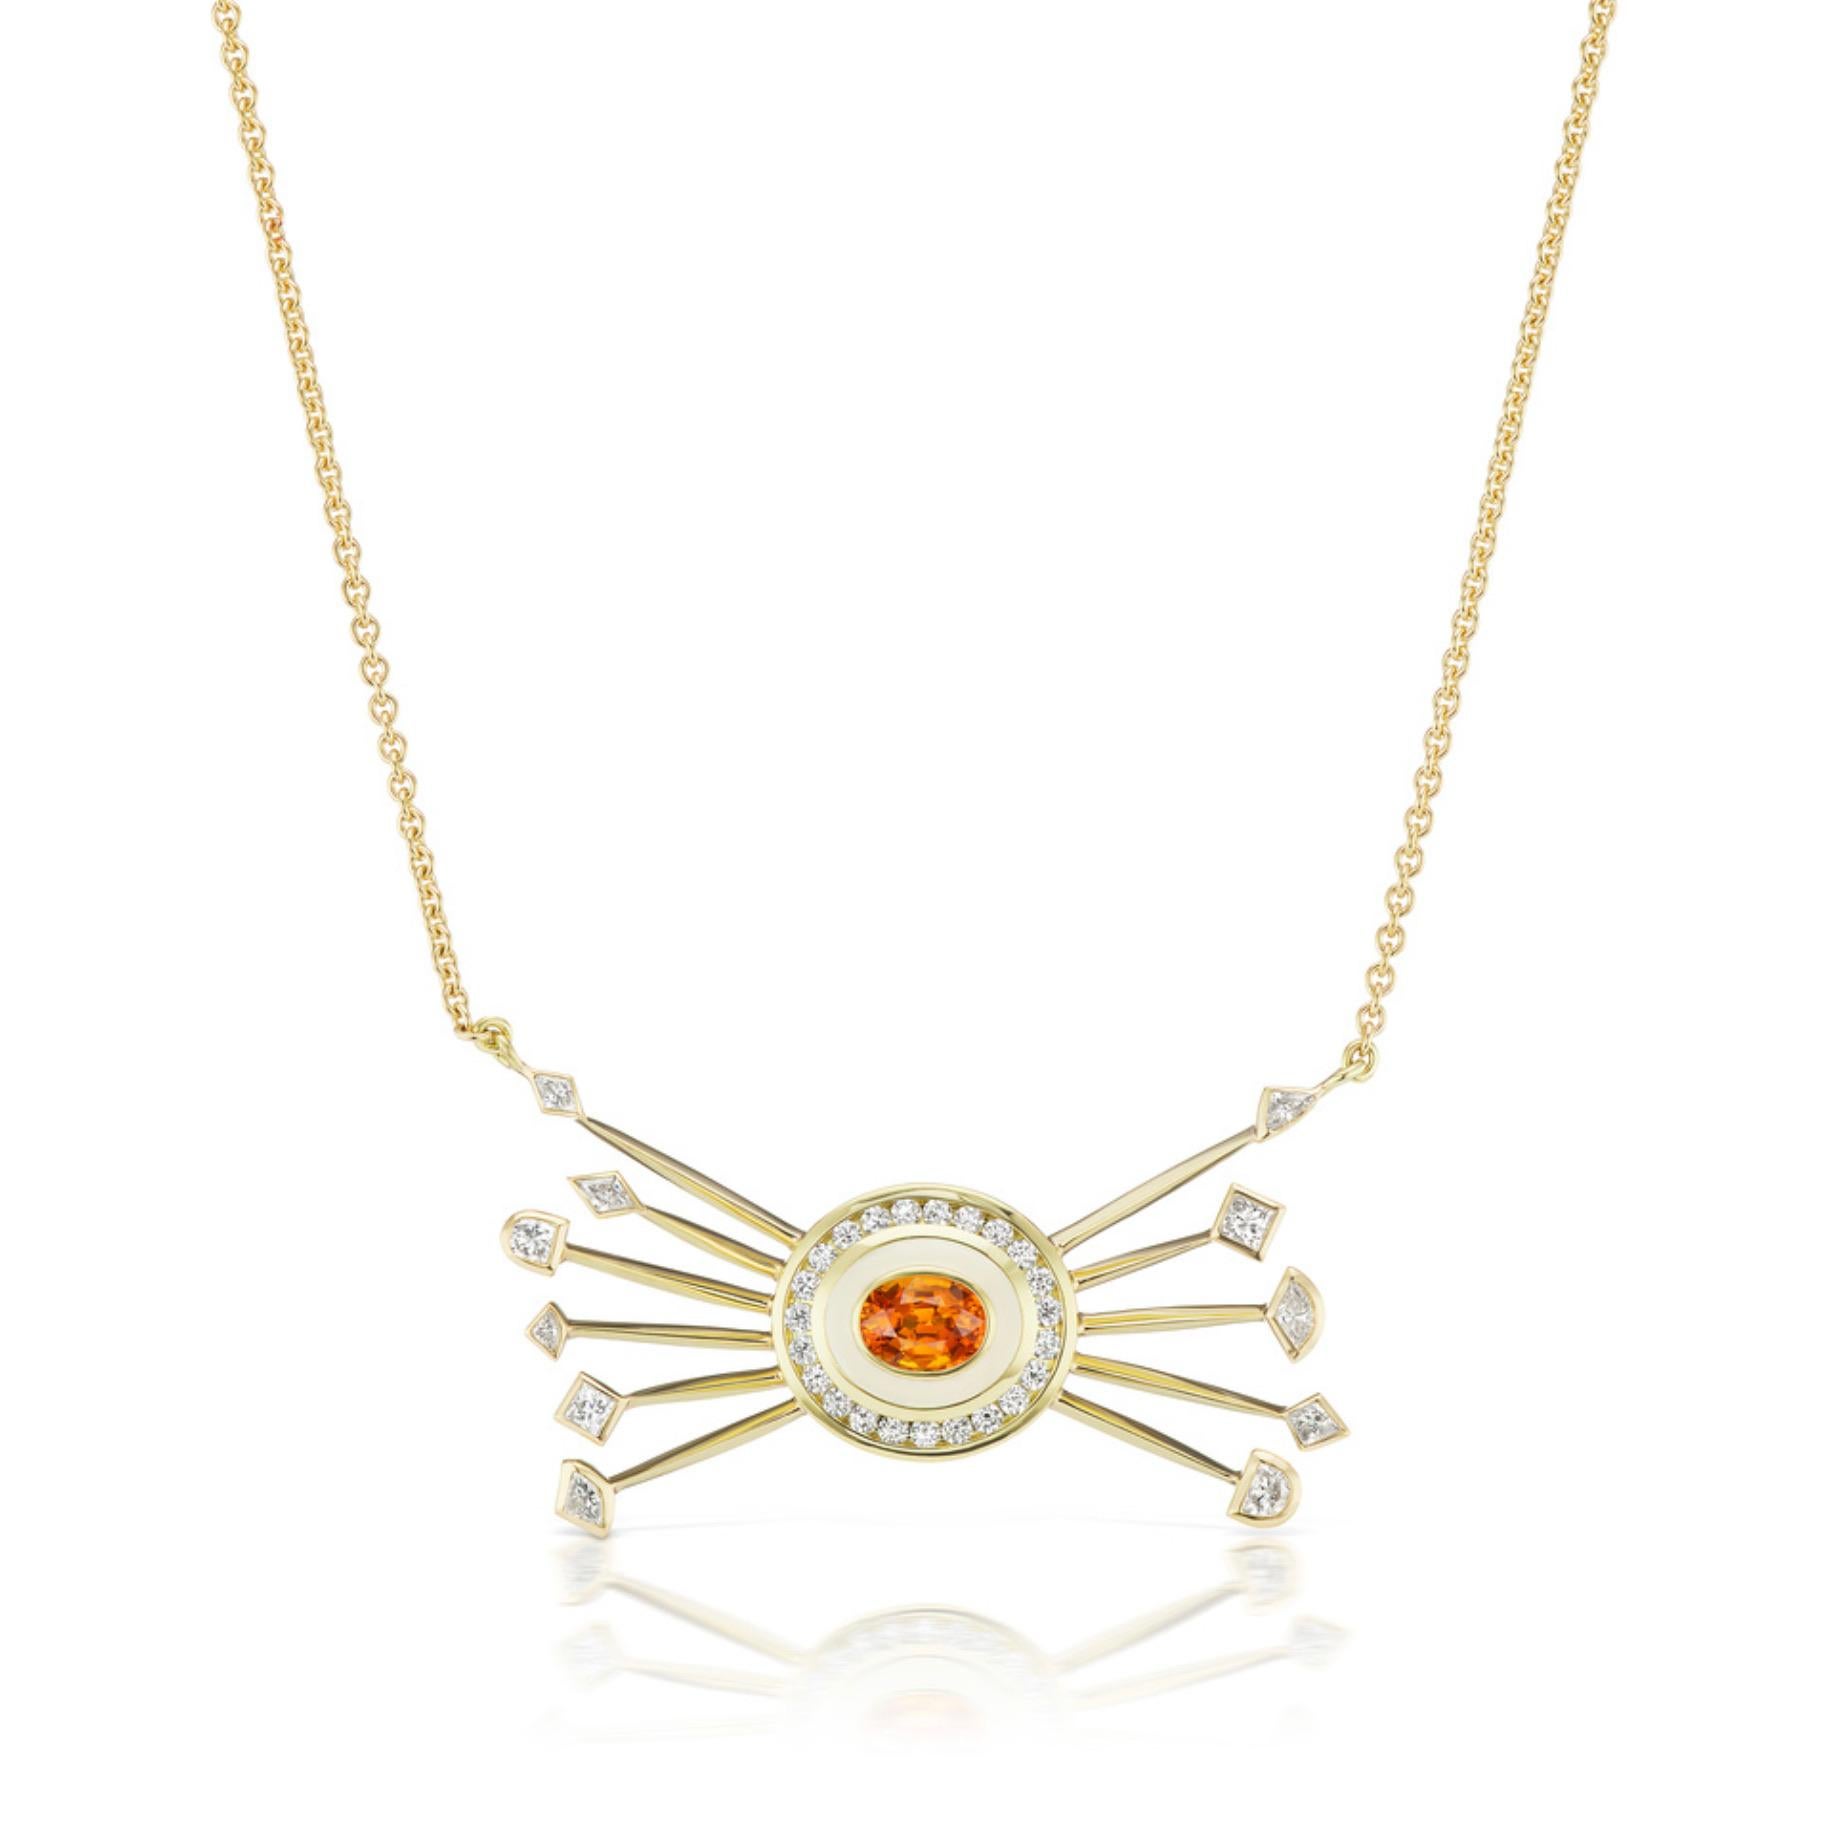 Andrew Glassford's evolution of his Museum Series comes in the form of his Satellite necklace. A vivid 1.84 carat oval Orange Sapphire surrounded by cream enamel and .58 carats of round brilliant GH VSI diamonds. Radiating from the center are 11